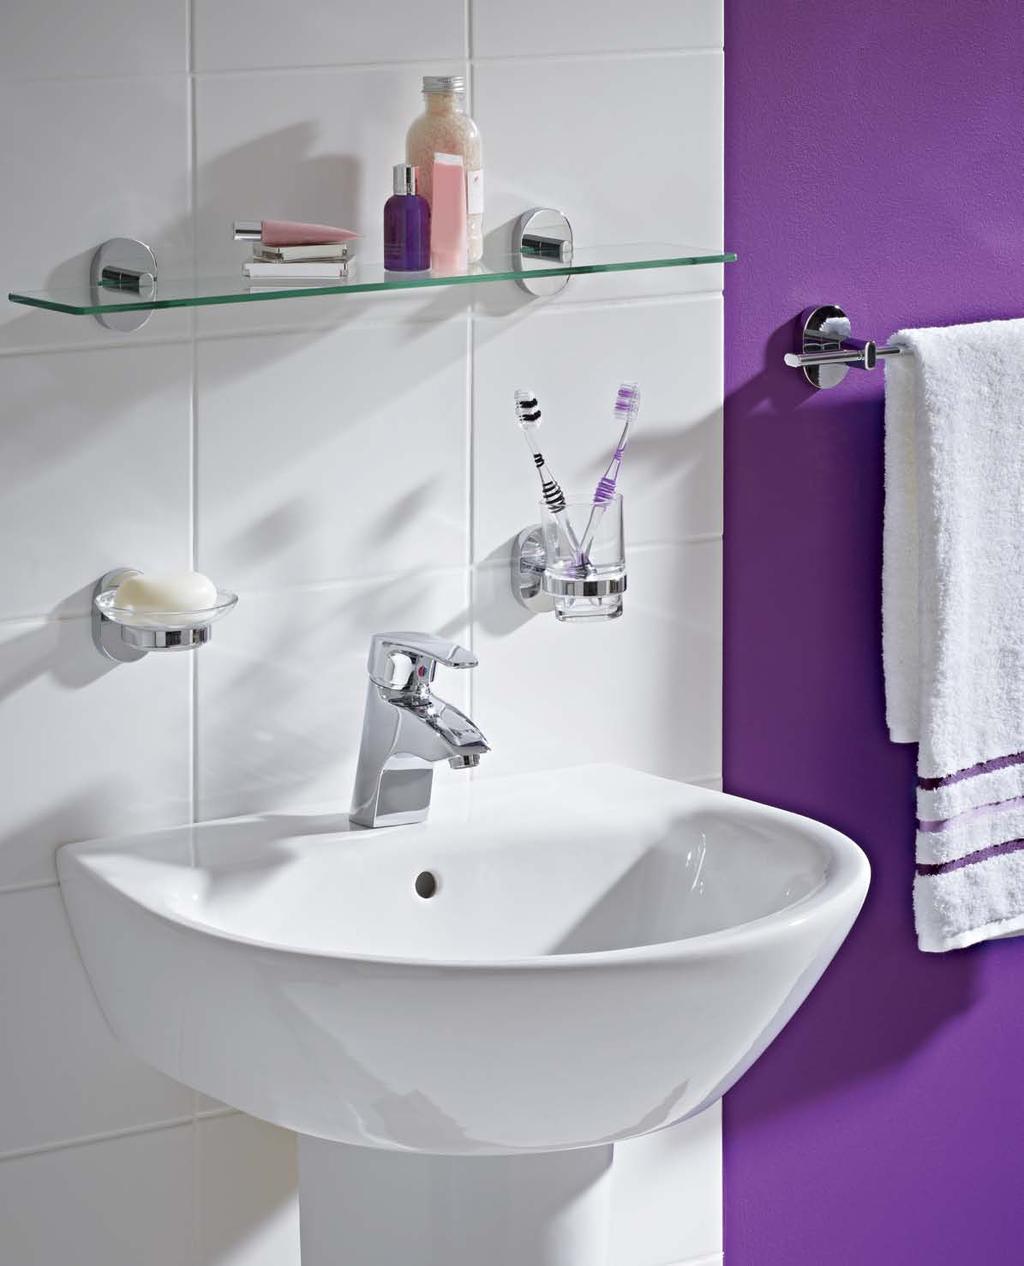 103 Our stylish range of wall mounted accessories combine design innovation and top quality